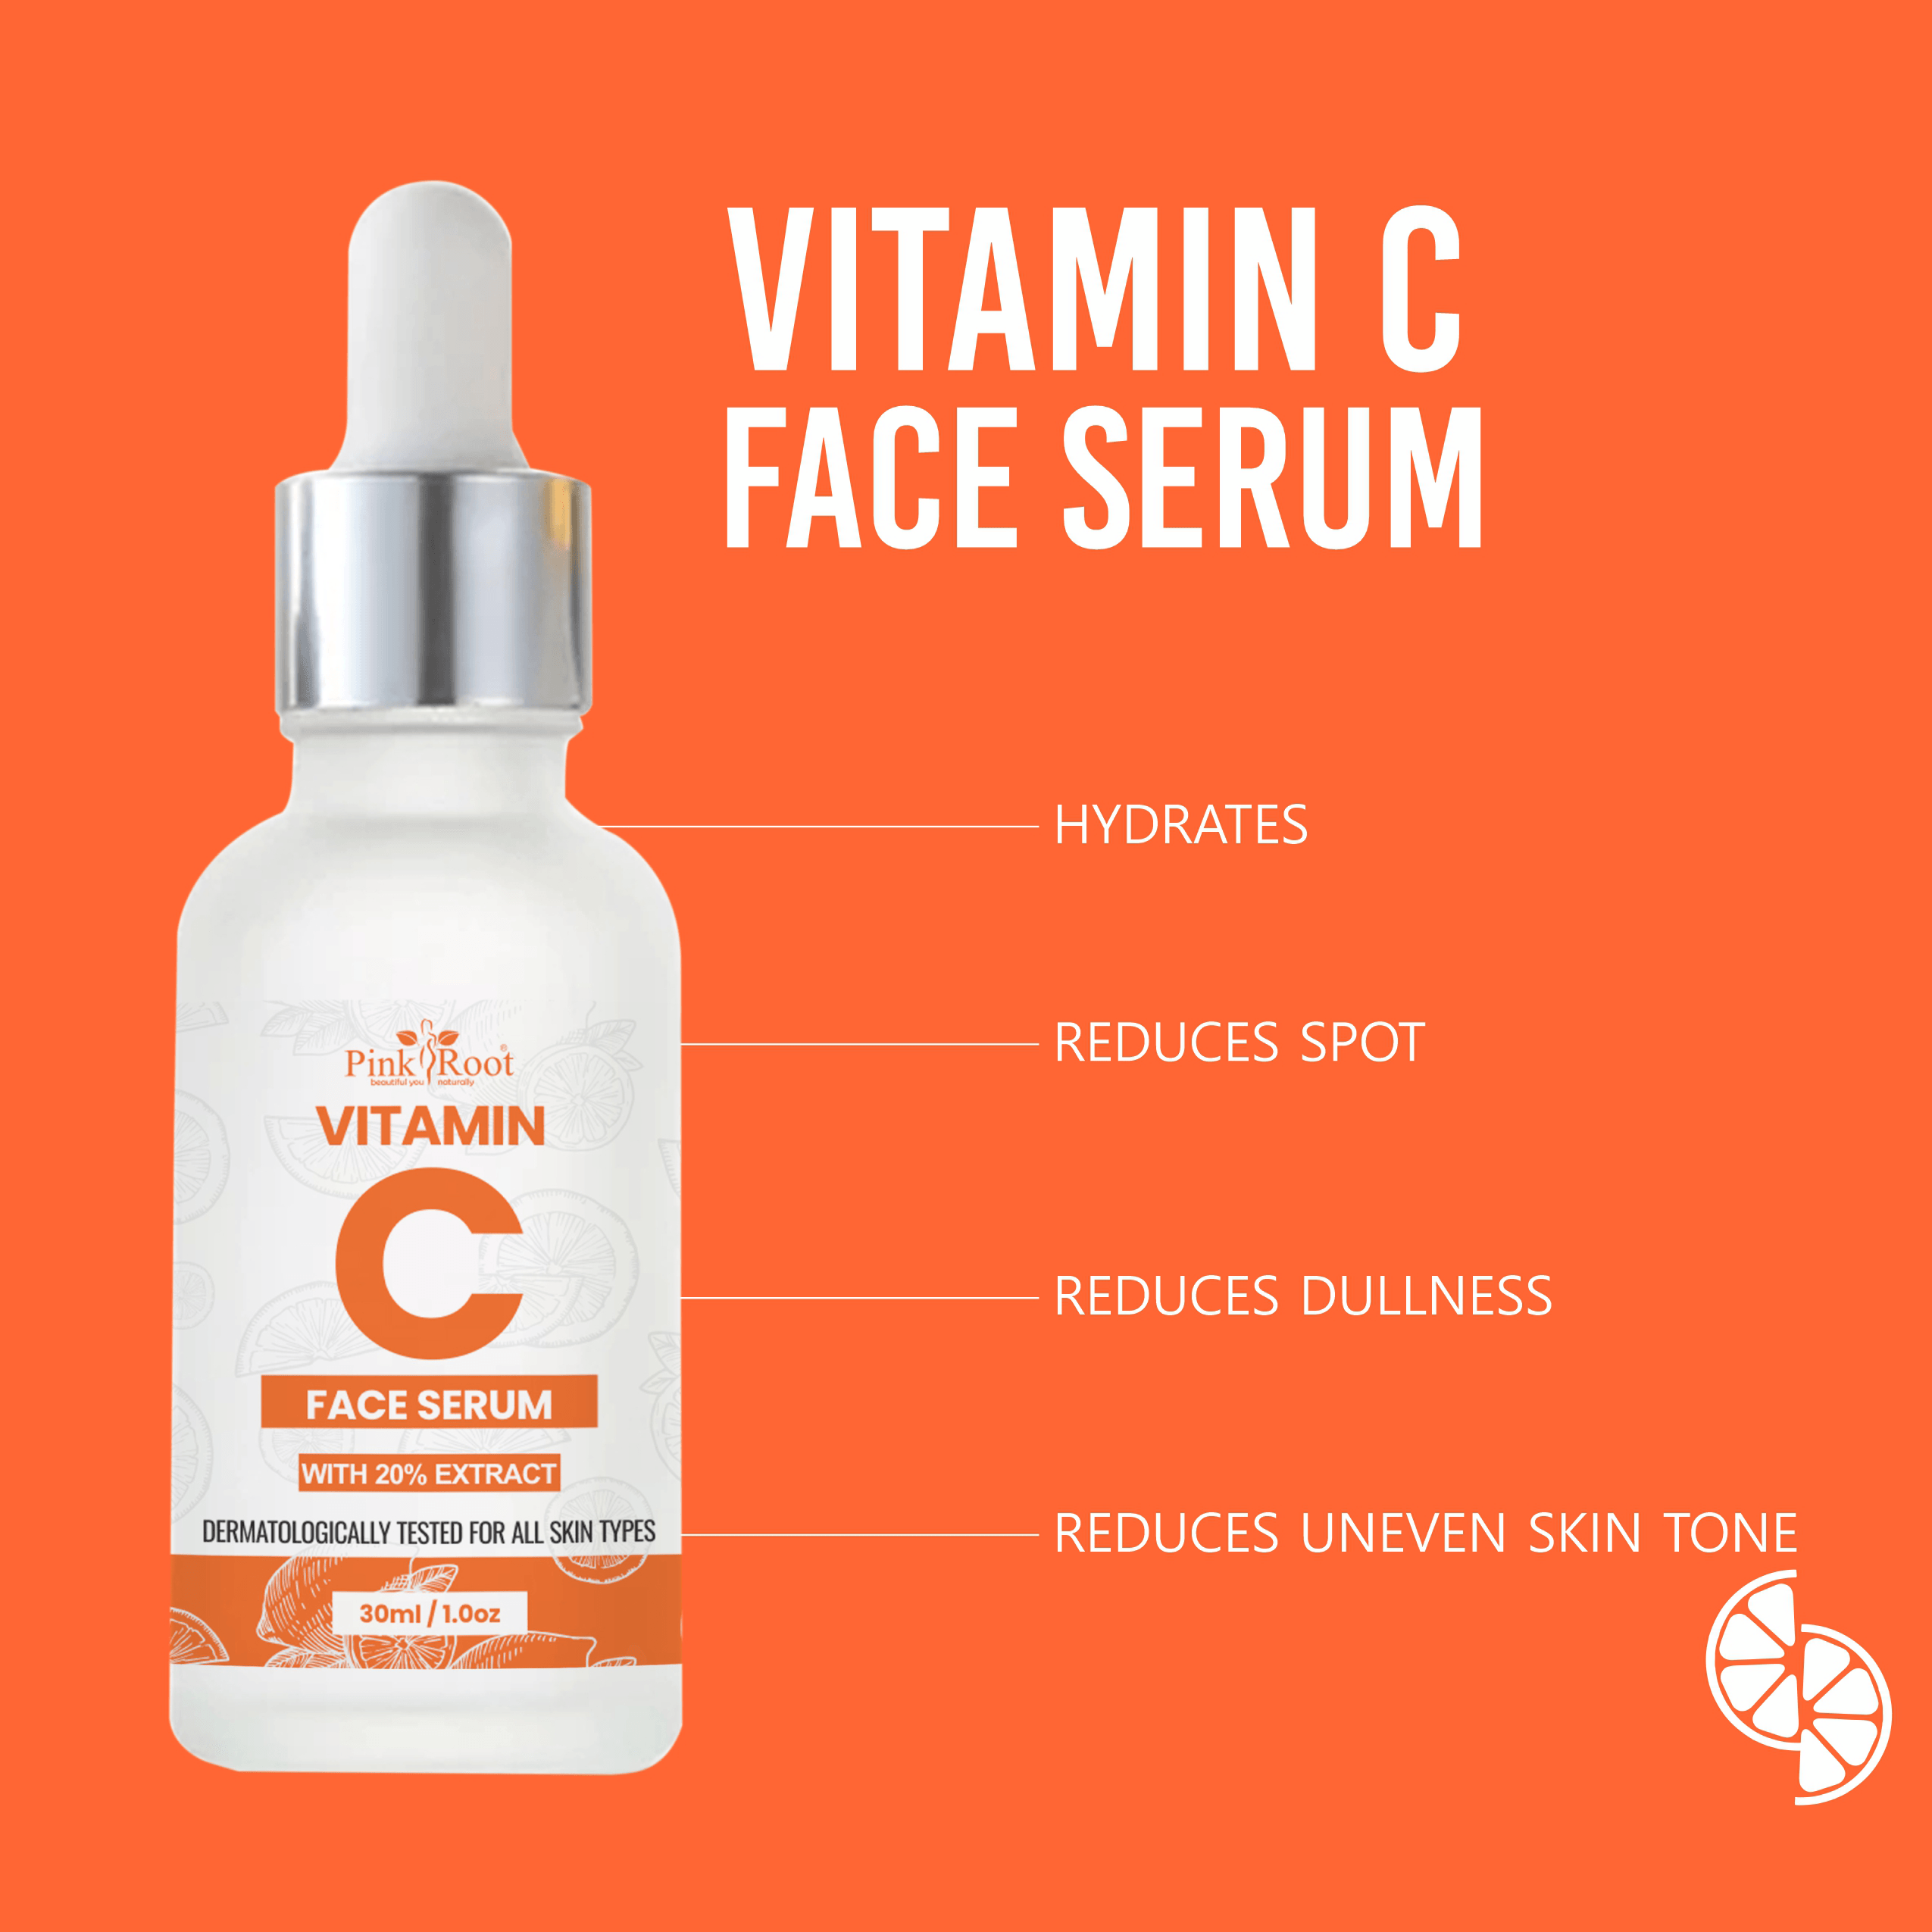 Vitamin C Face Serum 30ml, with 20% Extract for Glowing Skin, Suitable For All Skin Types - Pink Root